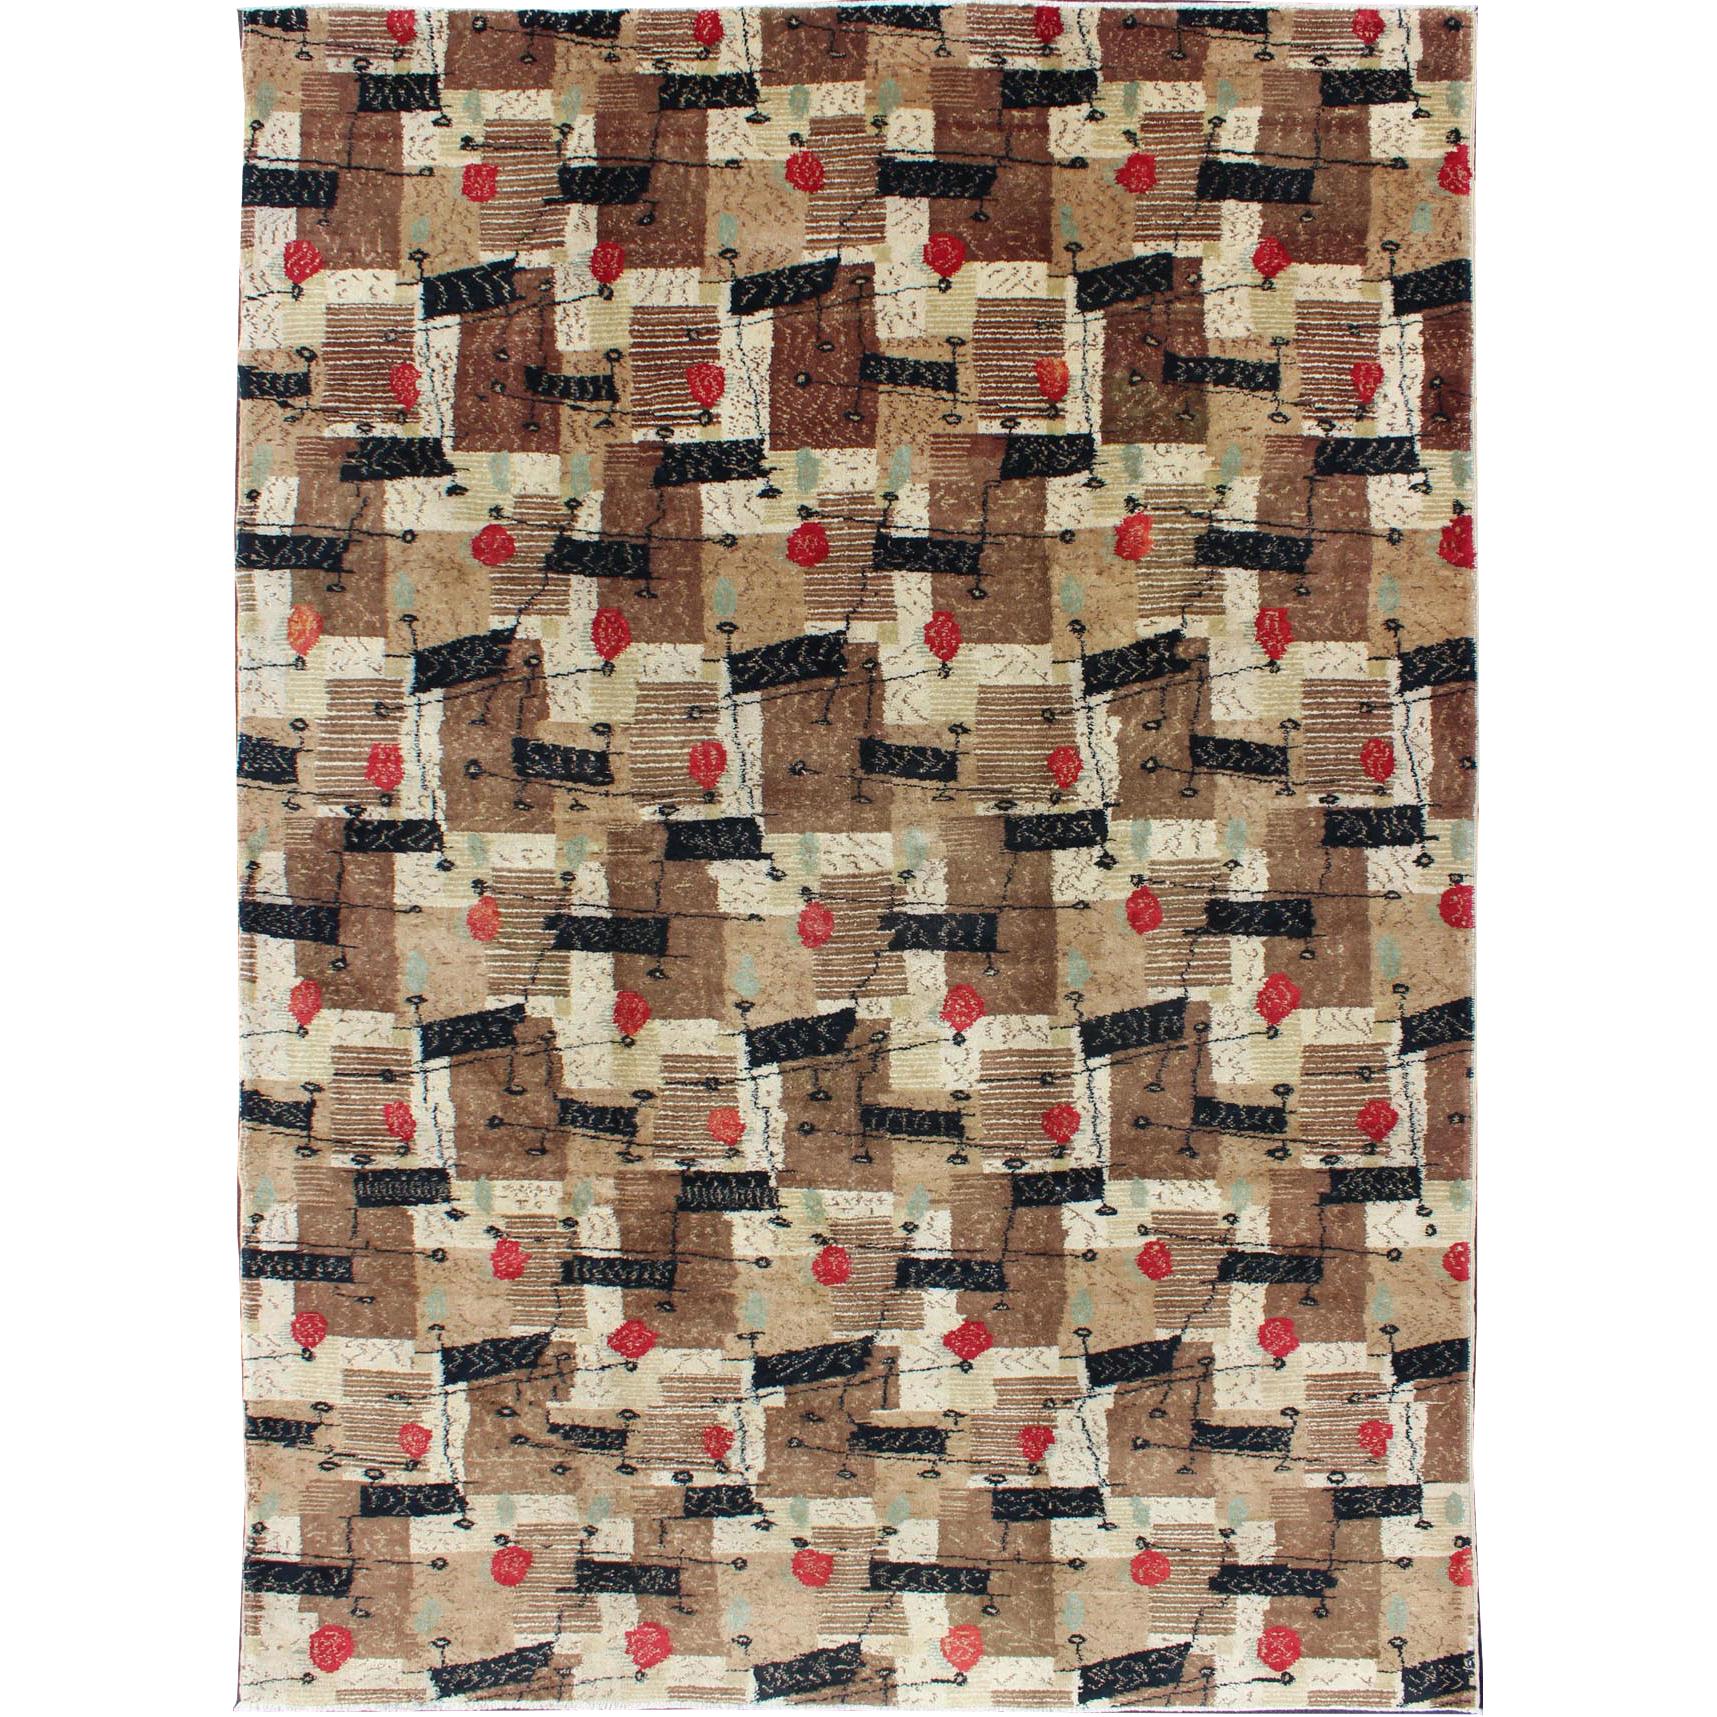 Mid-Century Modern Rug with Jagged Stripes and Blocks Design in Brown and Red